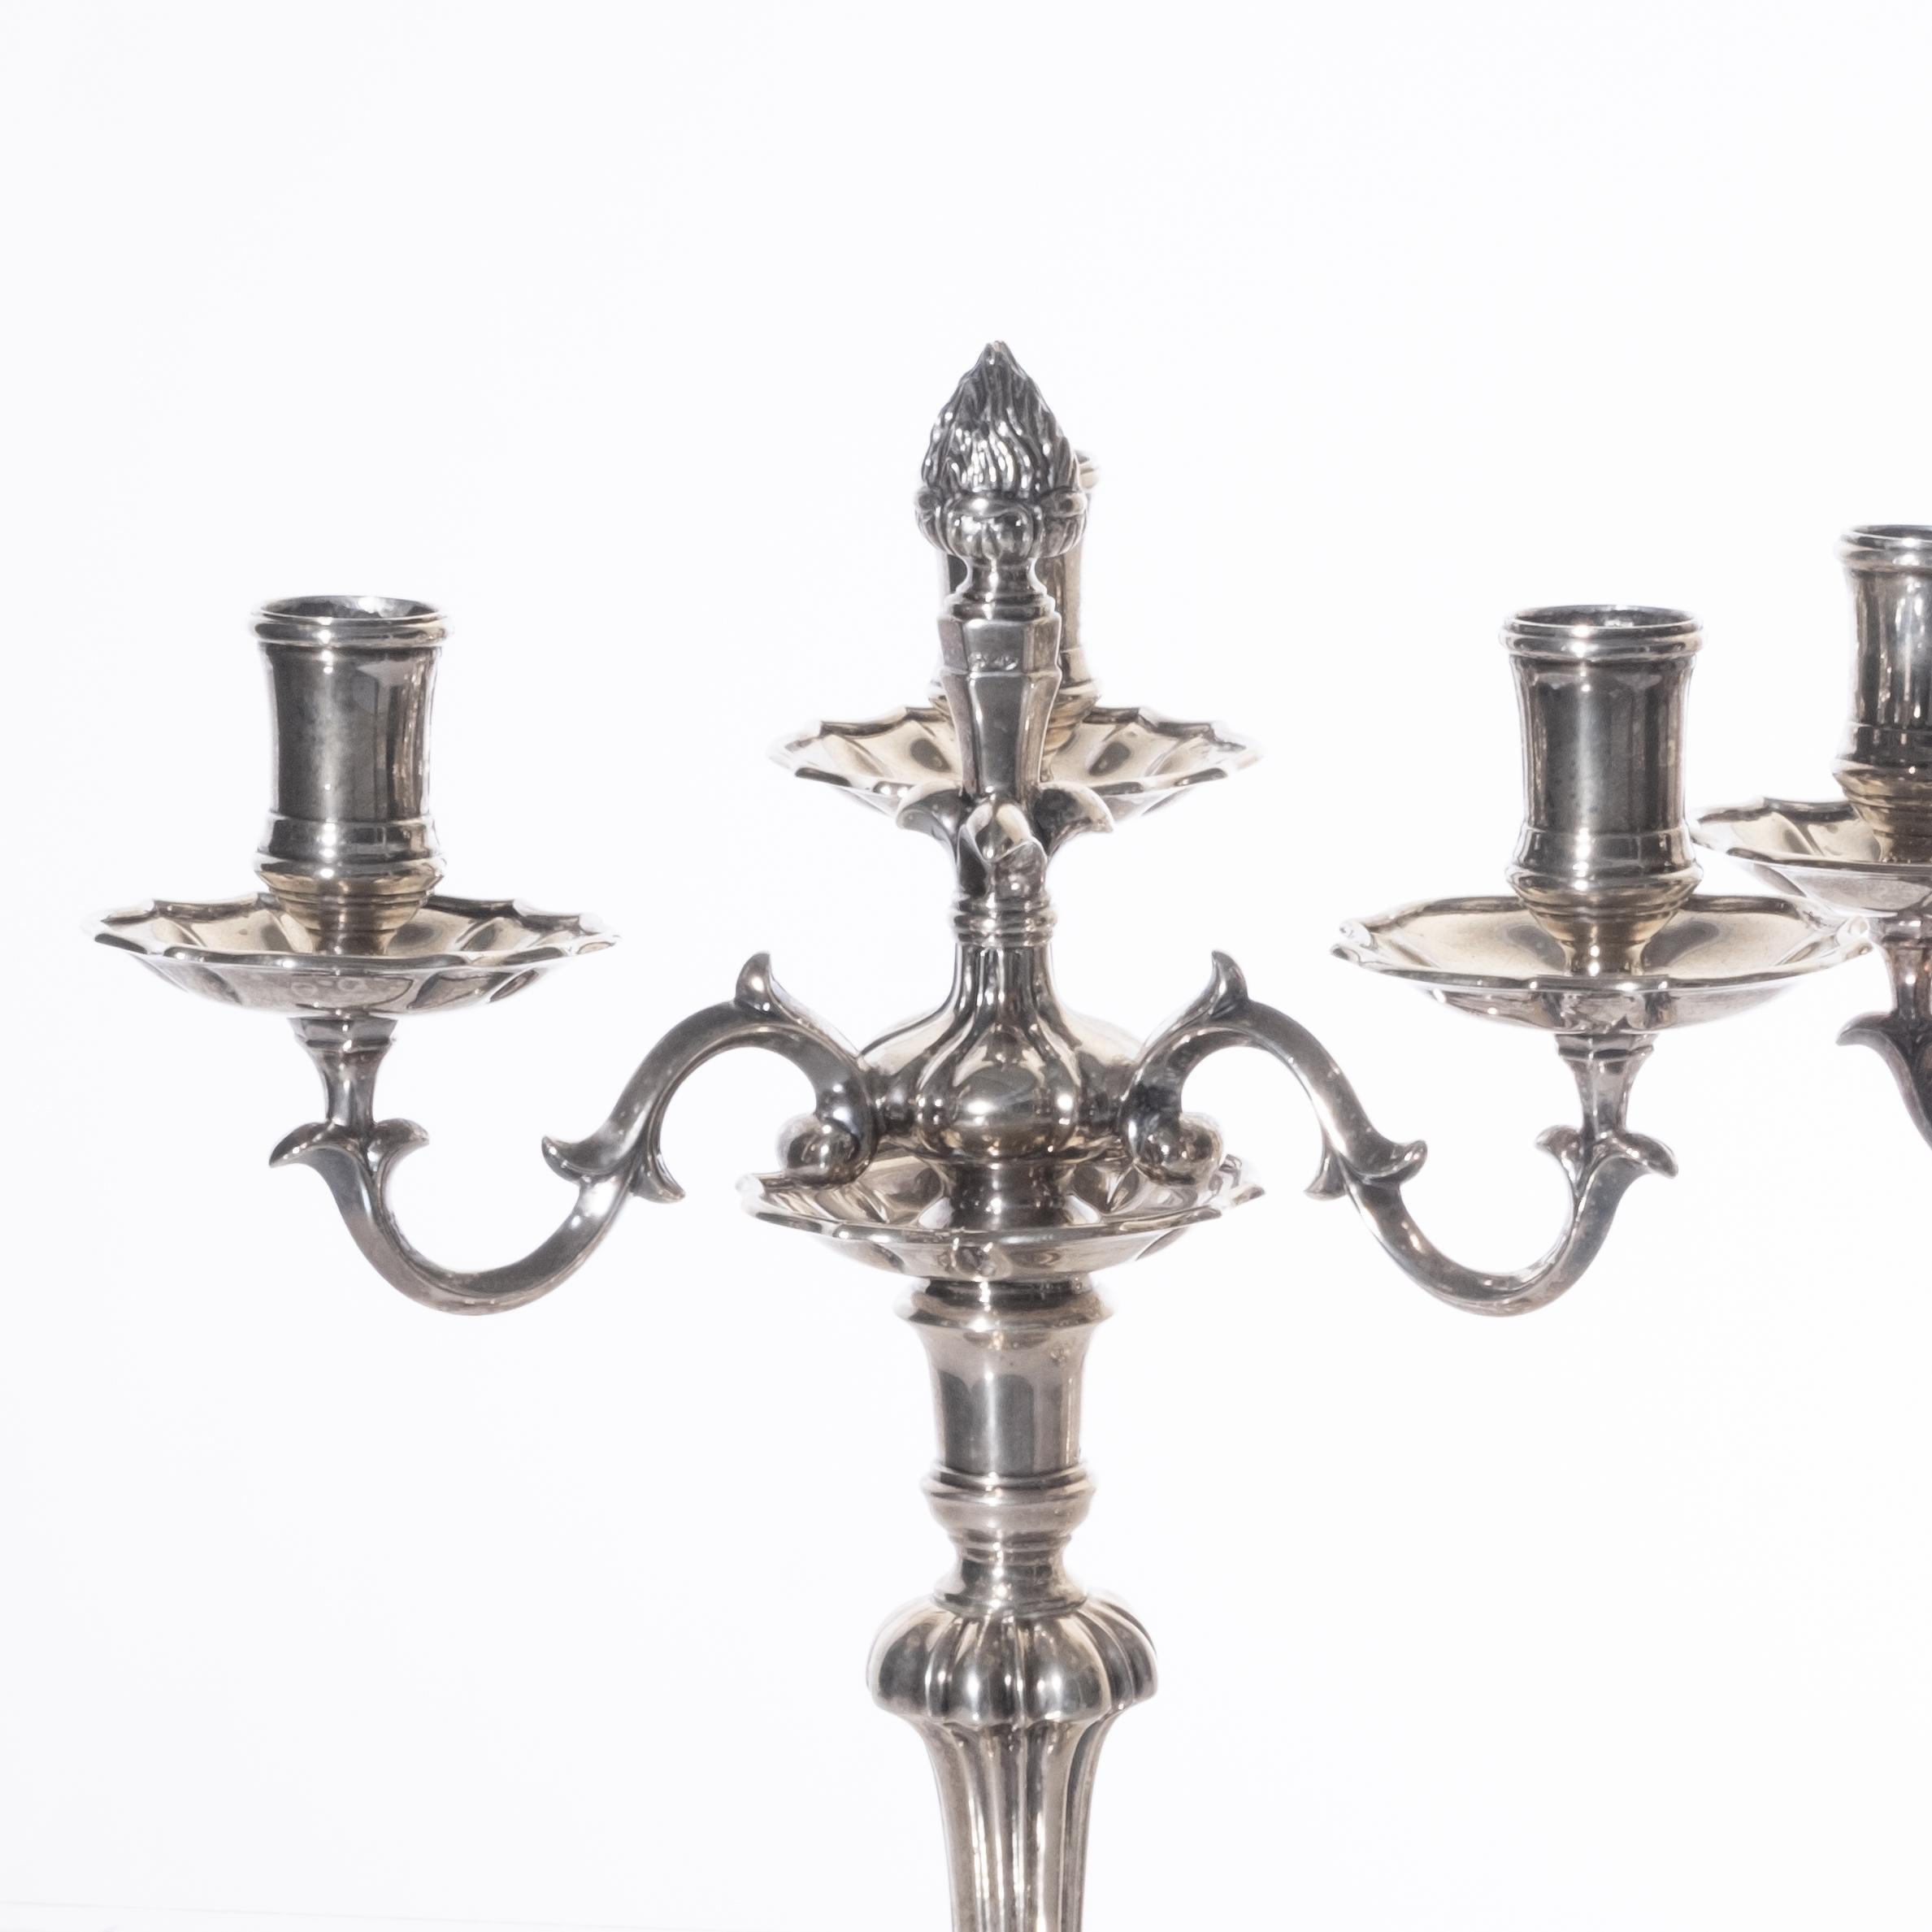 Fine Pair of Buccellati Signed Italian Silver 3 lite Candelabra convertible to single candle sticks. flame finial Stamped partially worn signature Mario Buccellati, Made in Italy, 800. Weighs 81.3 oz